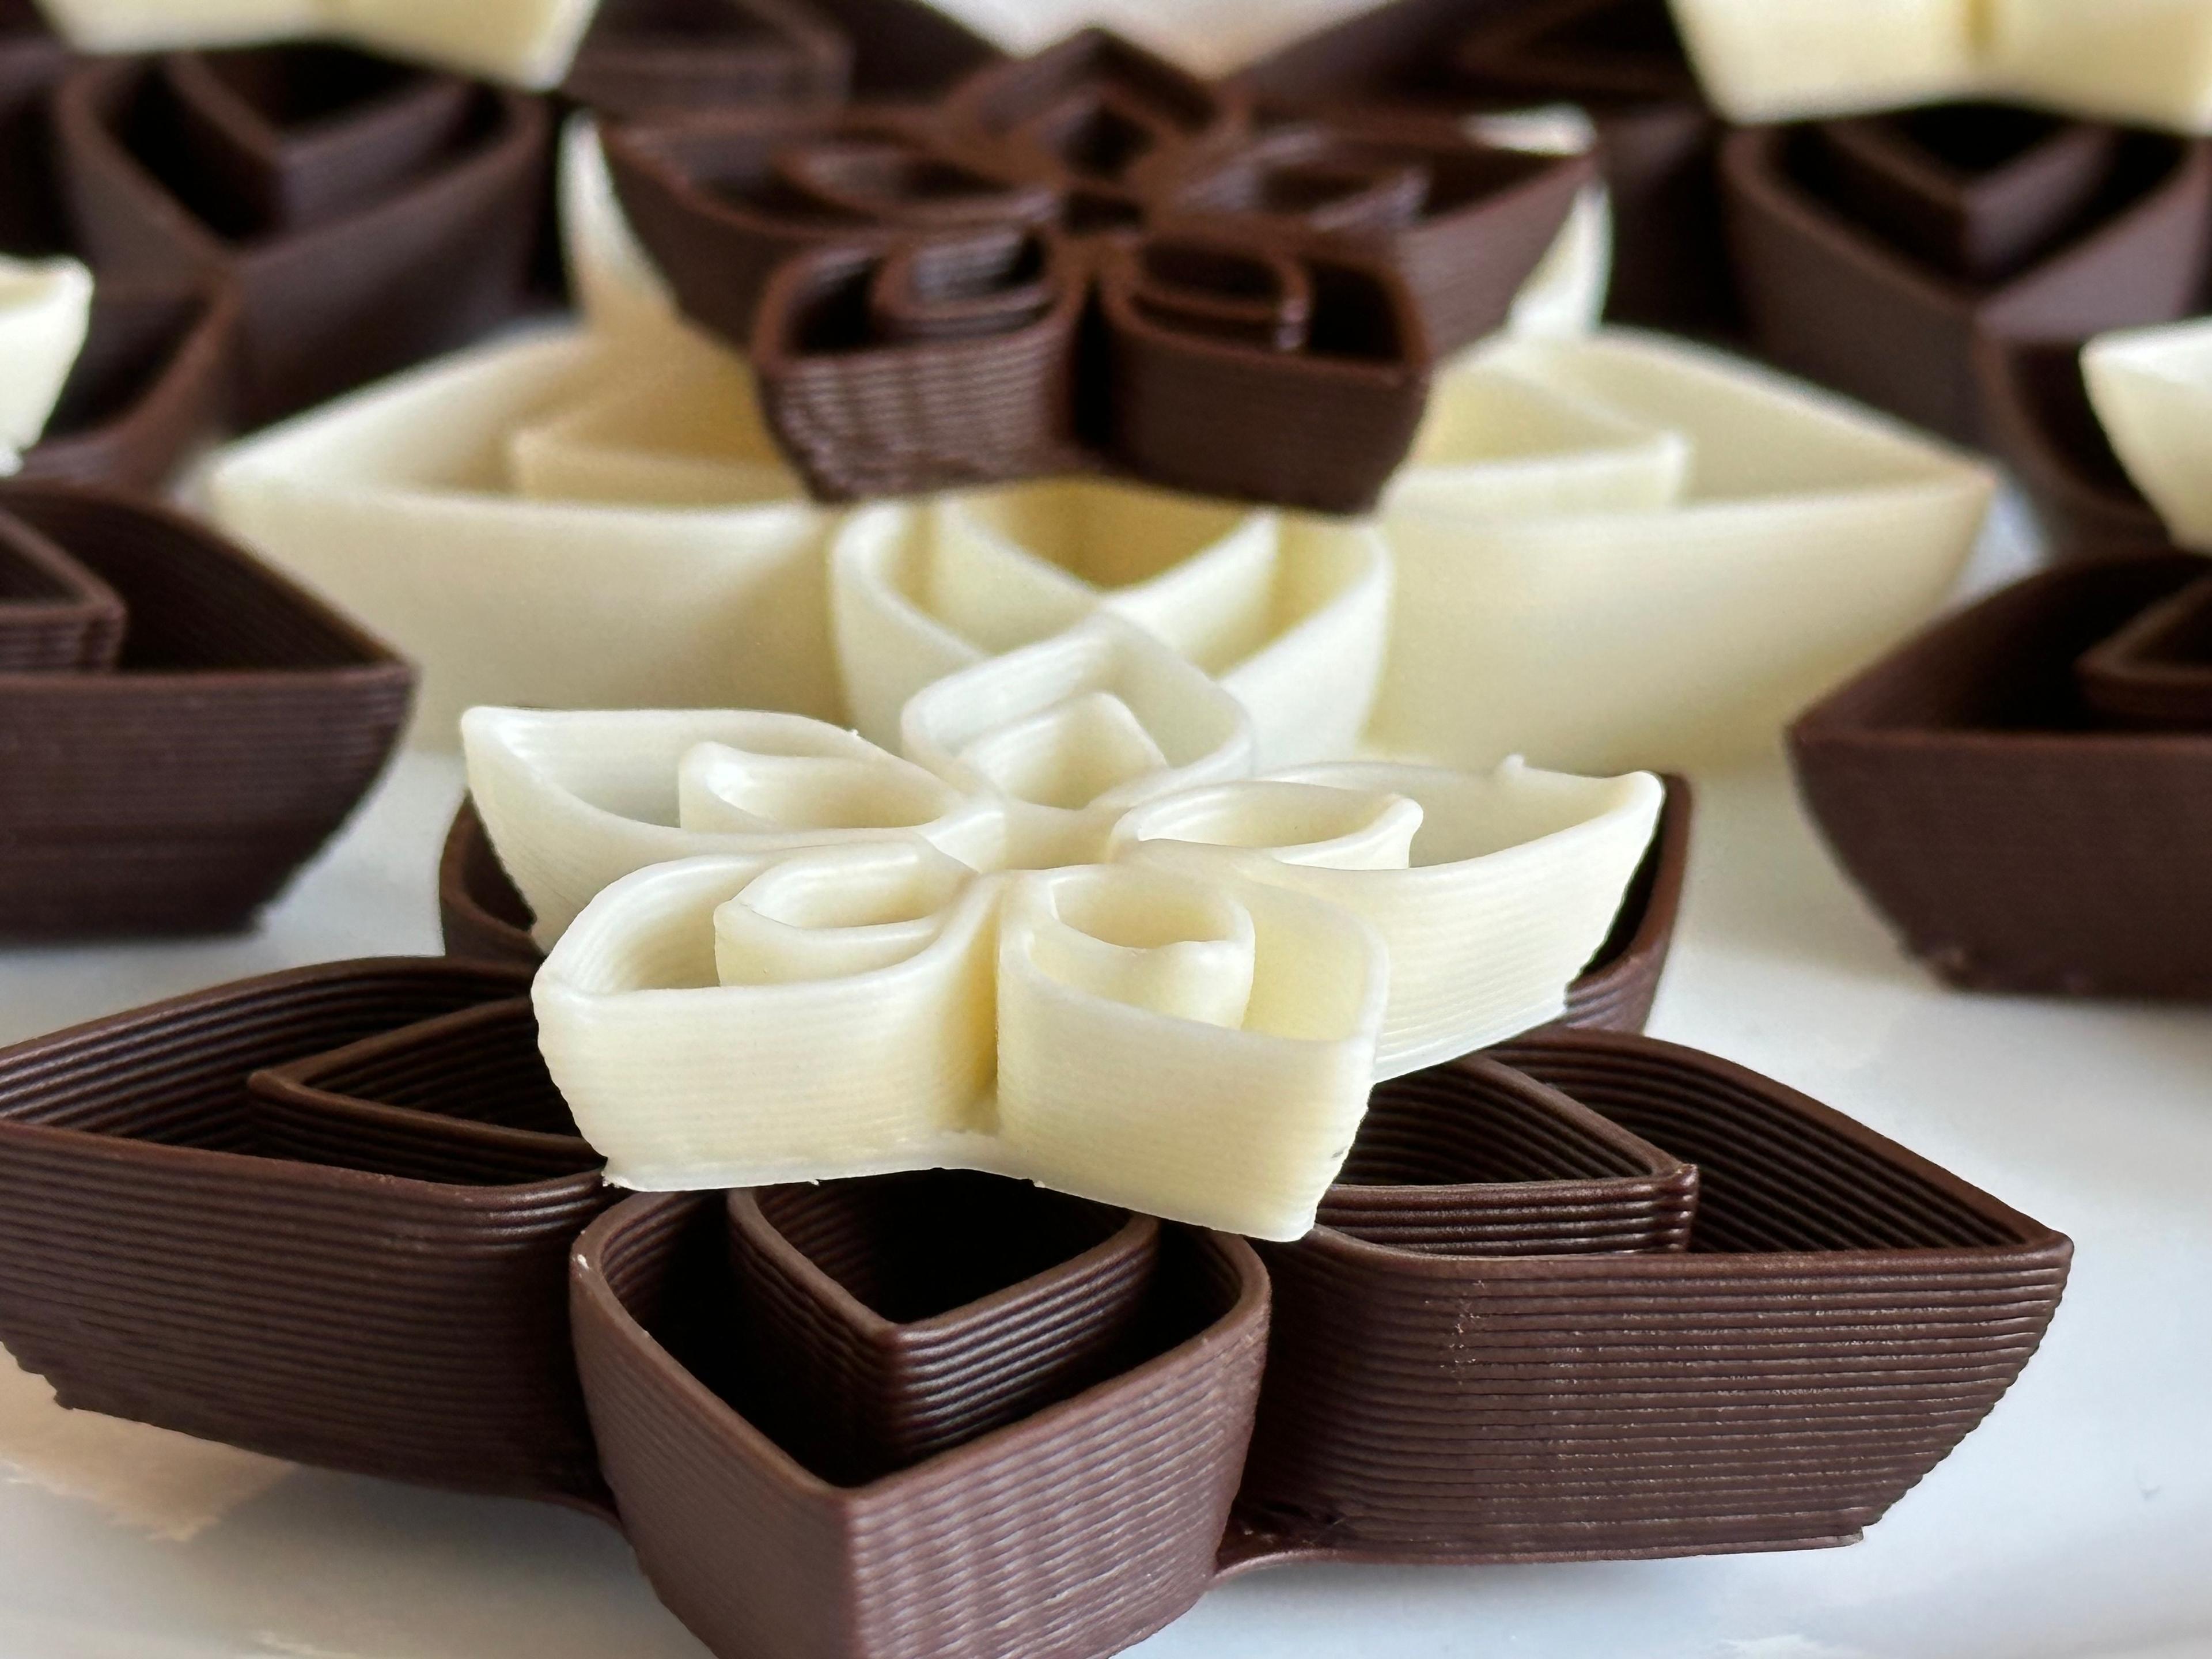 3D Printing with Chocolate!